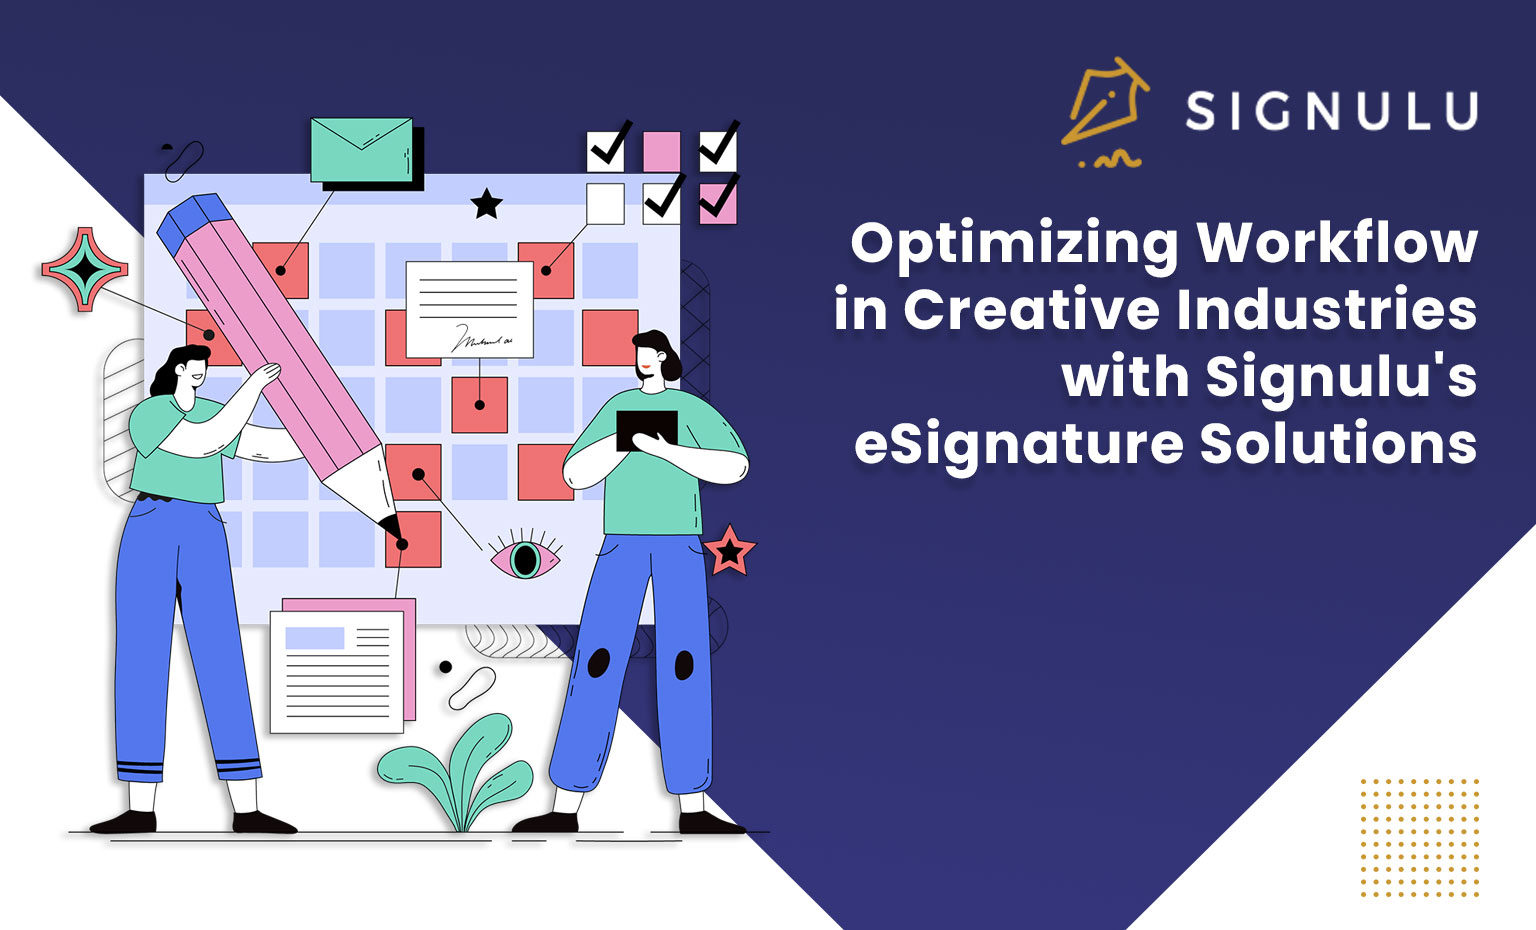 Optimizing Workflow in Creative Industries with Signulu’s eSignature Solutions